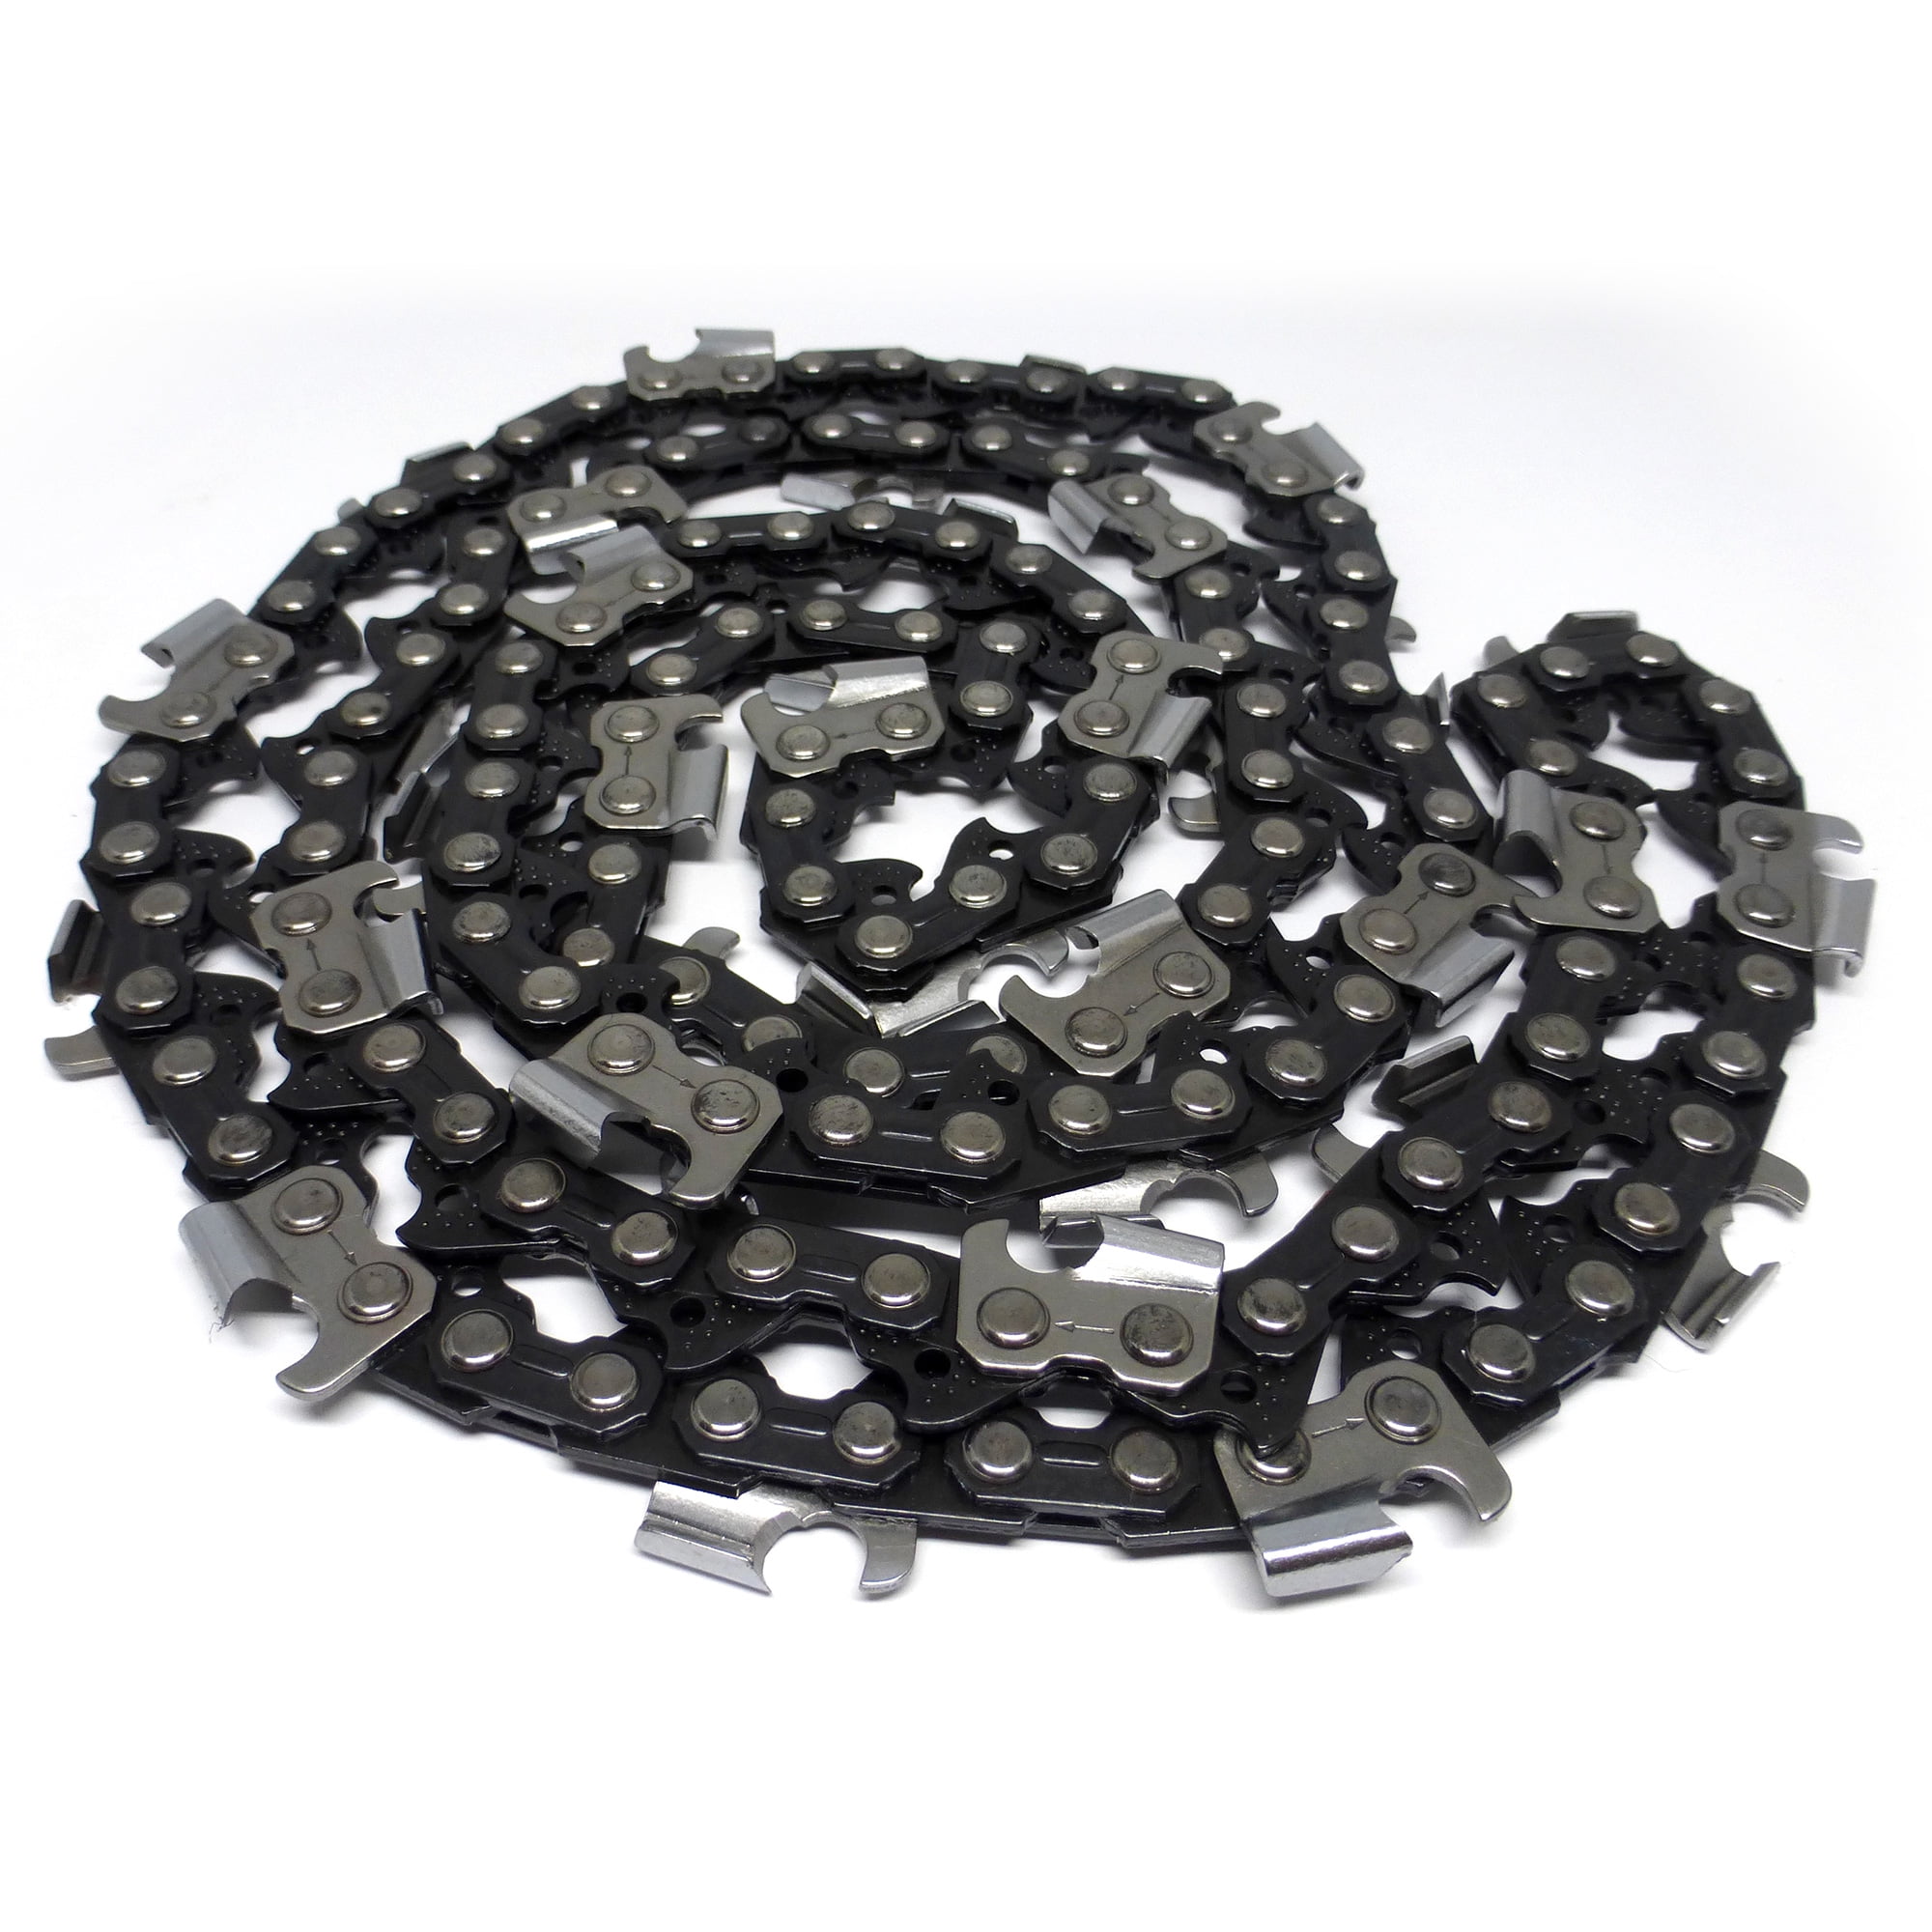 2 Pack 72 Drive Links For 20" Bar Chainsaw Chain Loops Oregon 72LGX072G 